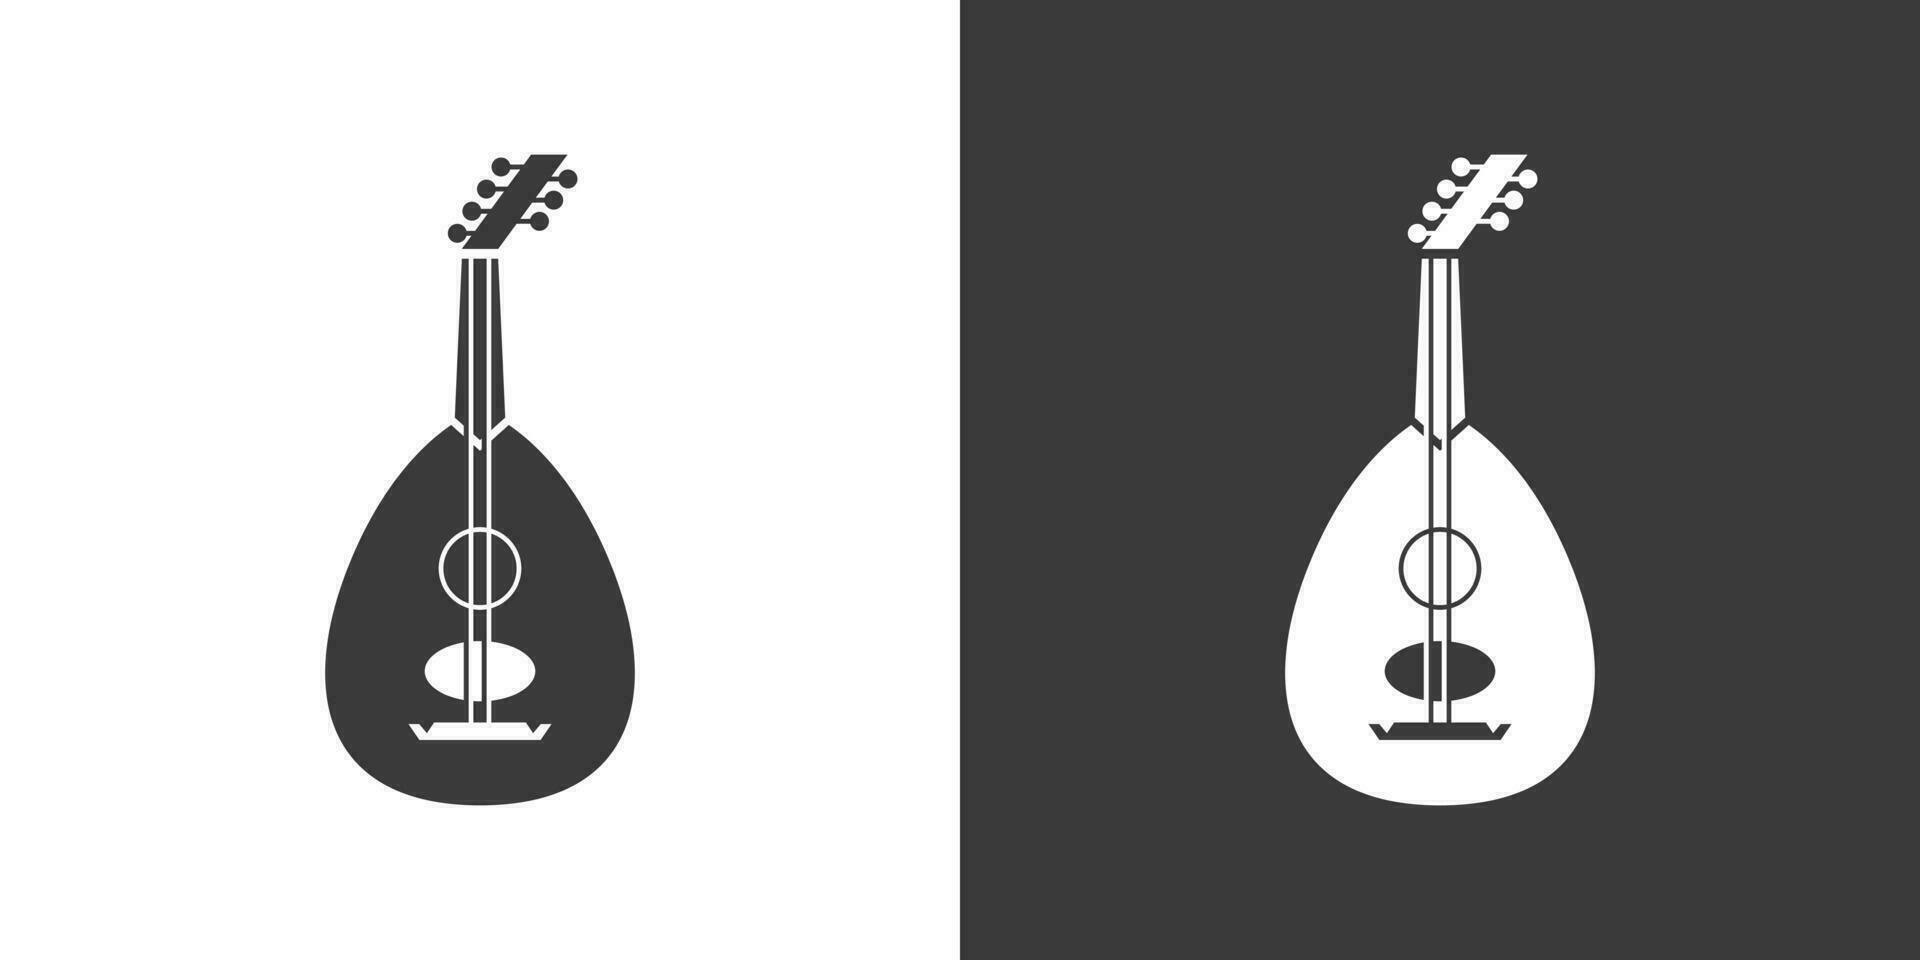 Lute flat web icon. Lute logo design. String instrument simple lute sign silhouette icon with invert color. Lute solid black icon vector design. Musical instruments concept